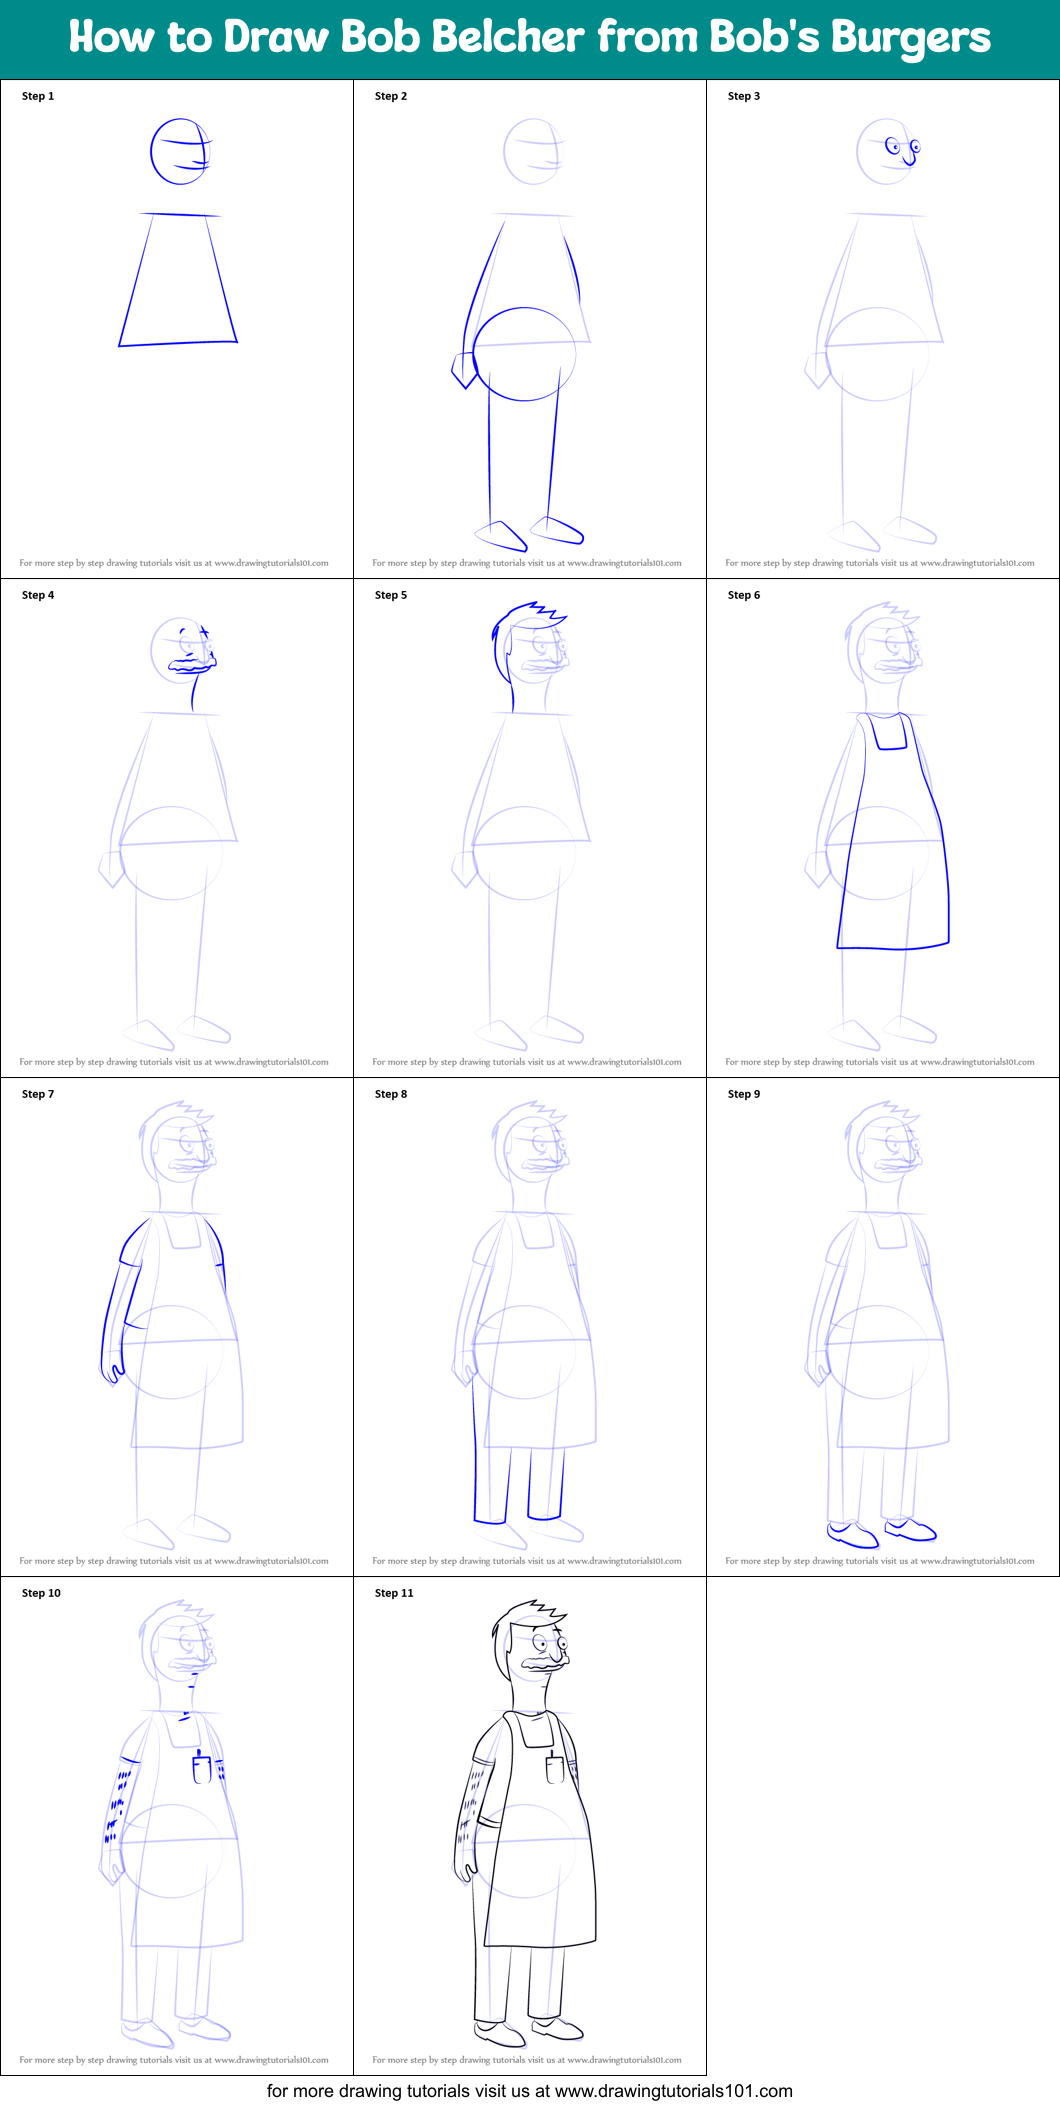 How to Draw Bob Belcher from Bob's Burgers printable step by step